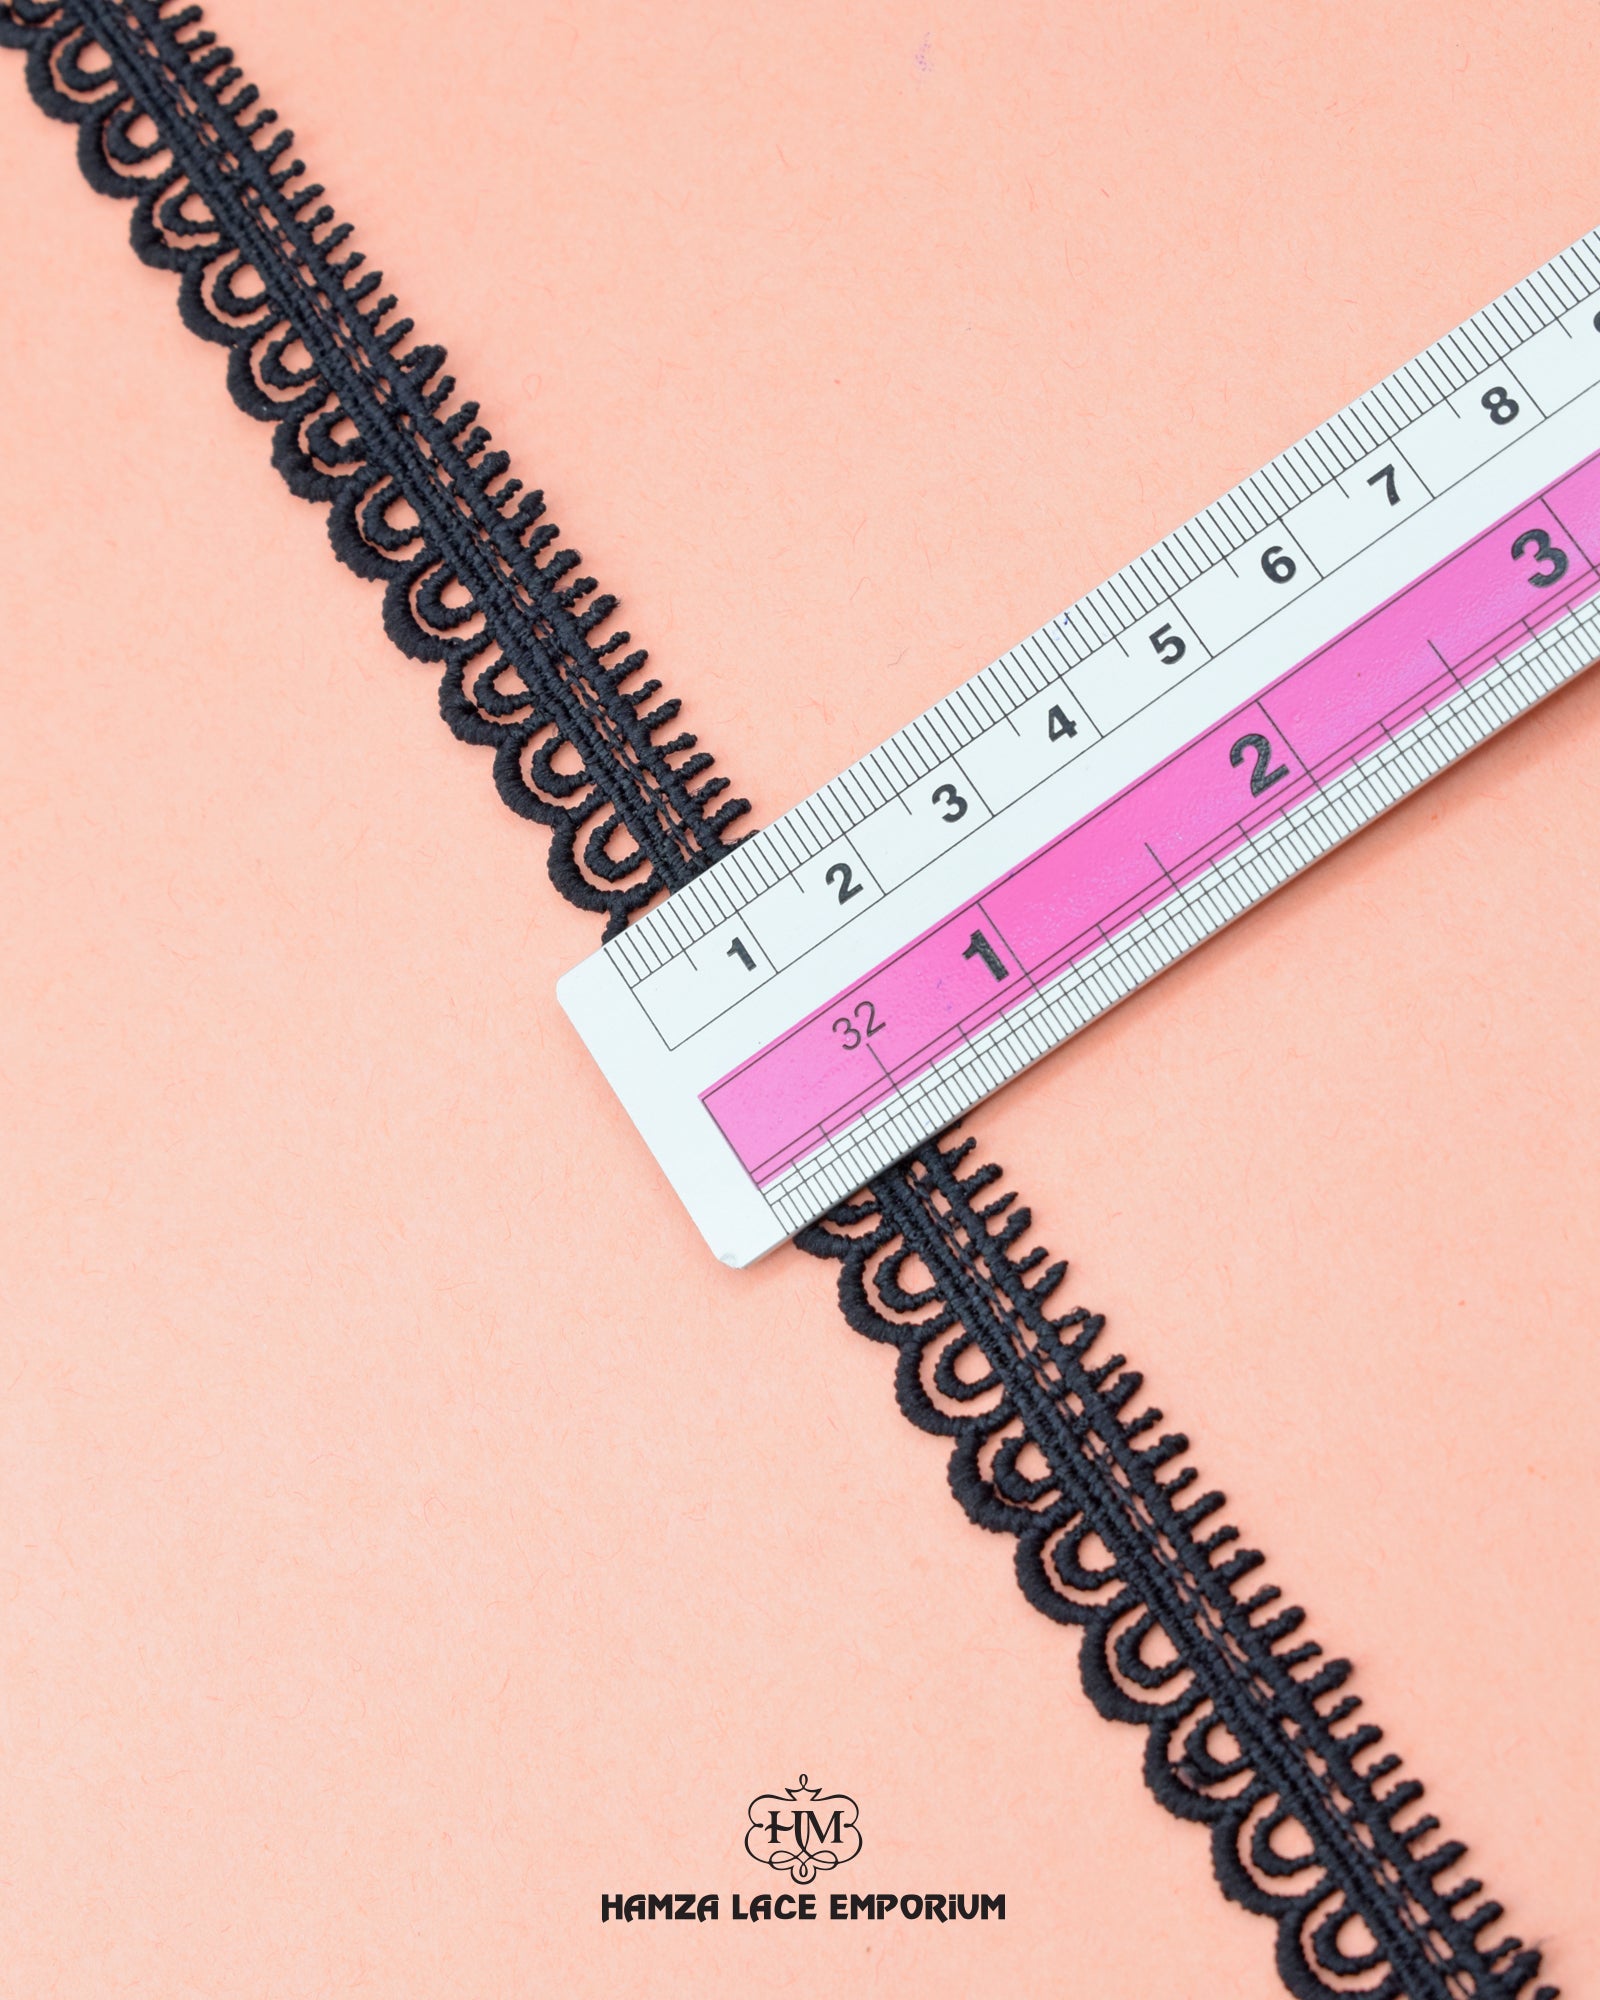 Size of the 'Edging Loop Lace 16172' is shown as '0.5' inches with the help of a ruler